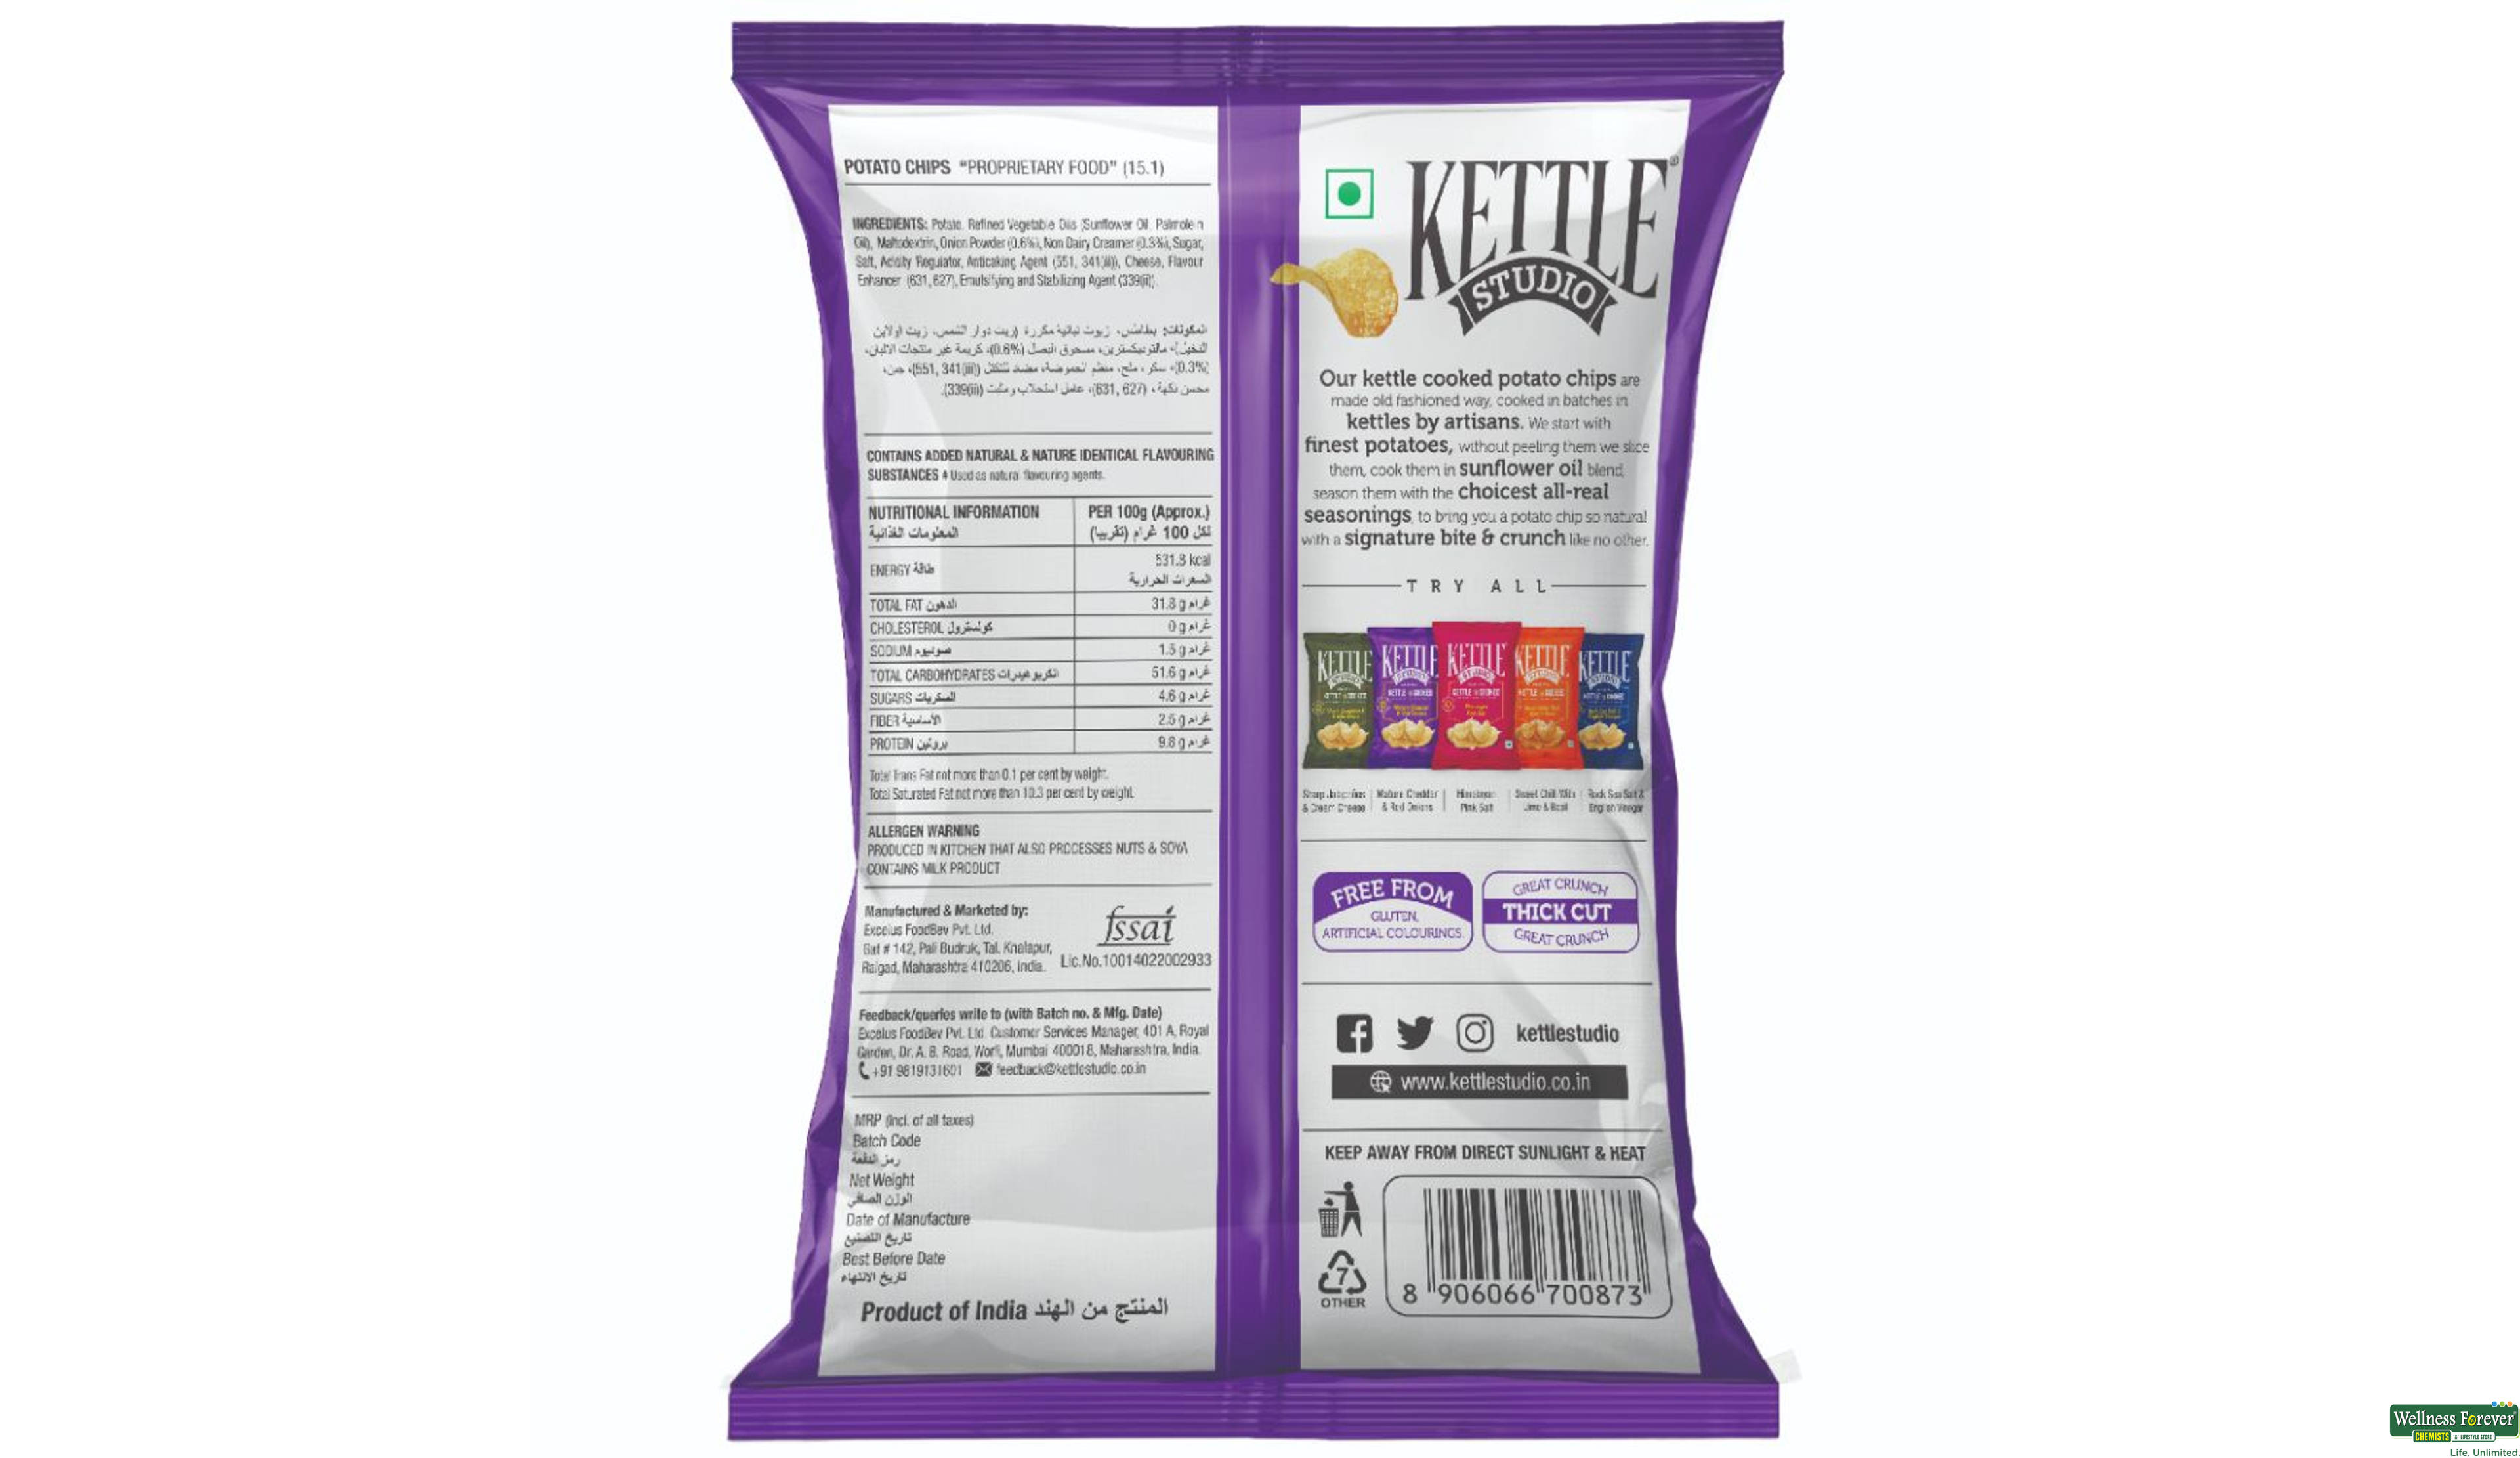 KETTLE CHIPS MATURE CHEDDAR/ONION 47GM- 2, 47GM, 